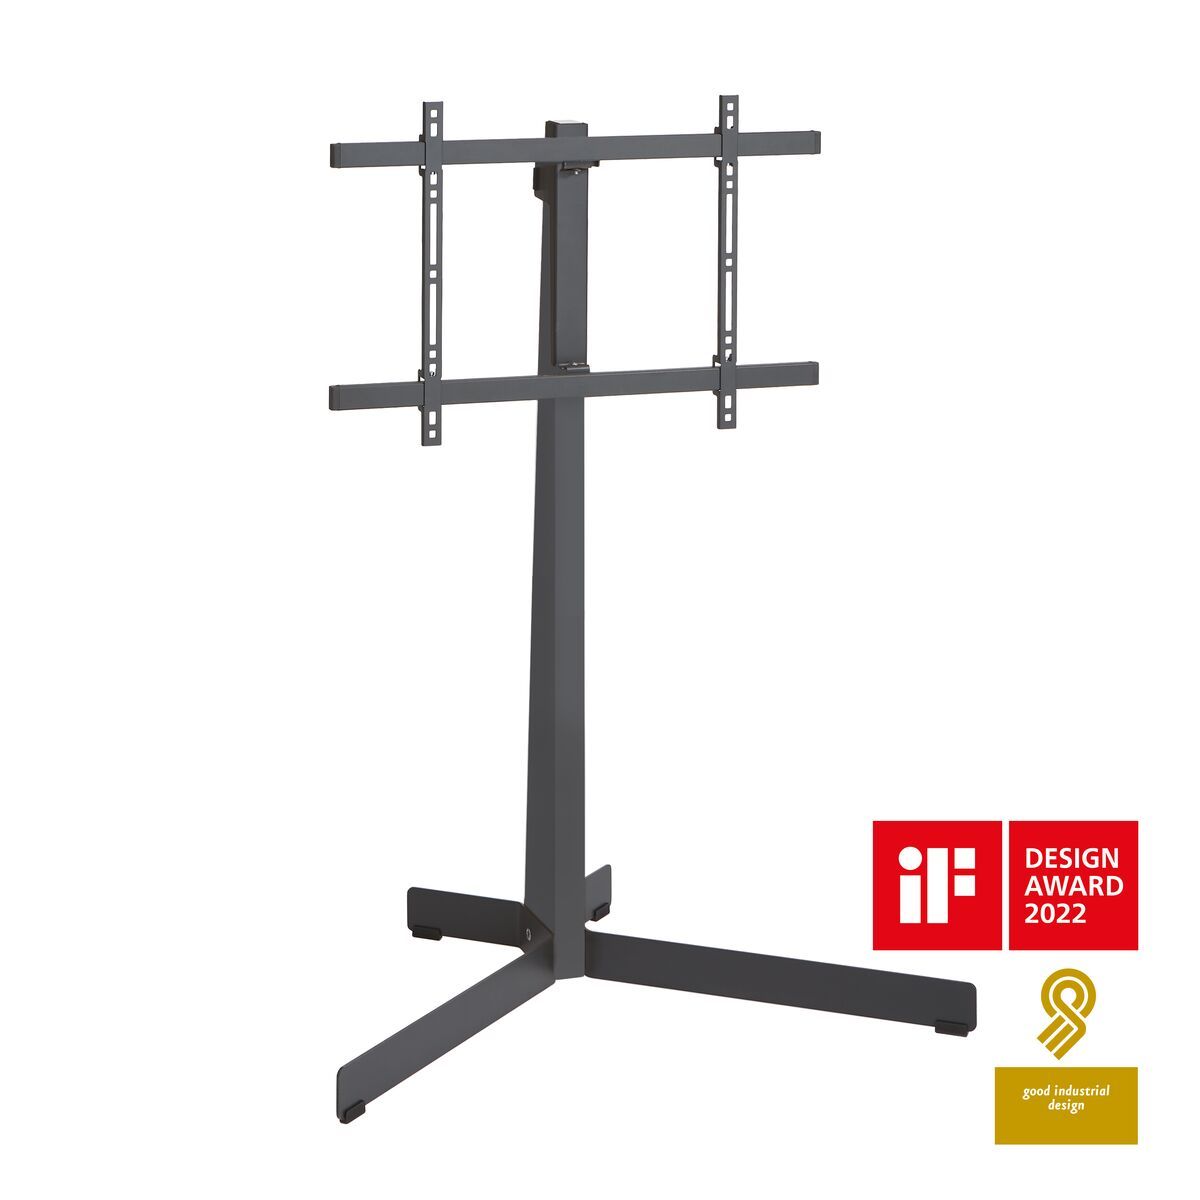 Vogel's TVS 3690 TV Floor Stand (black) - Suitable for 40 up to 77 inch TVs up to 50 kg - Promo